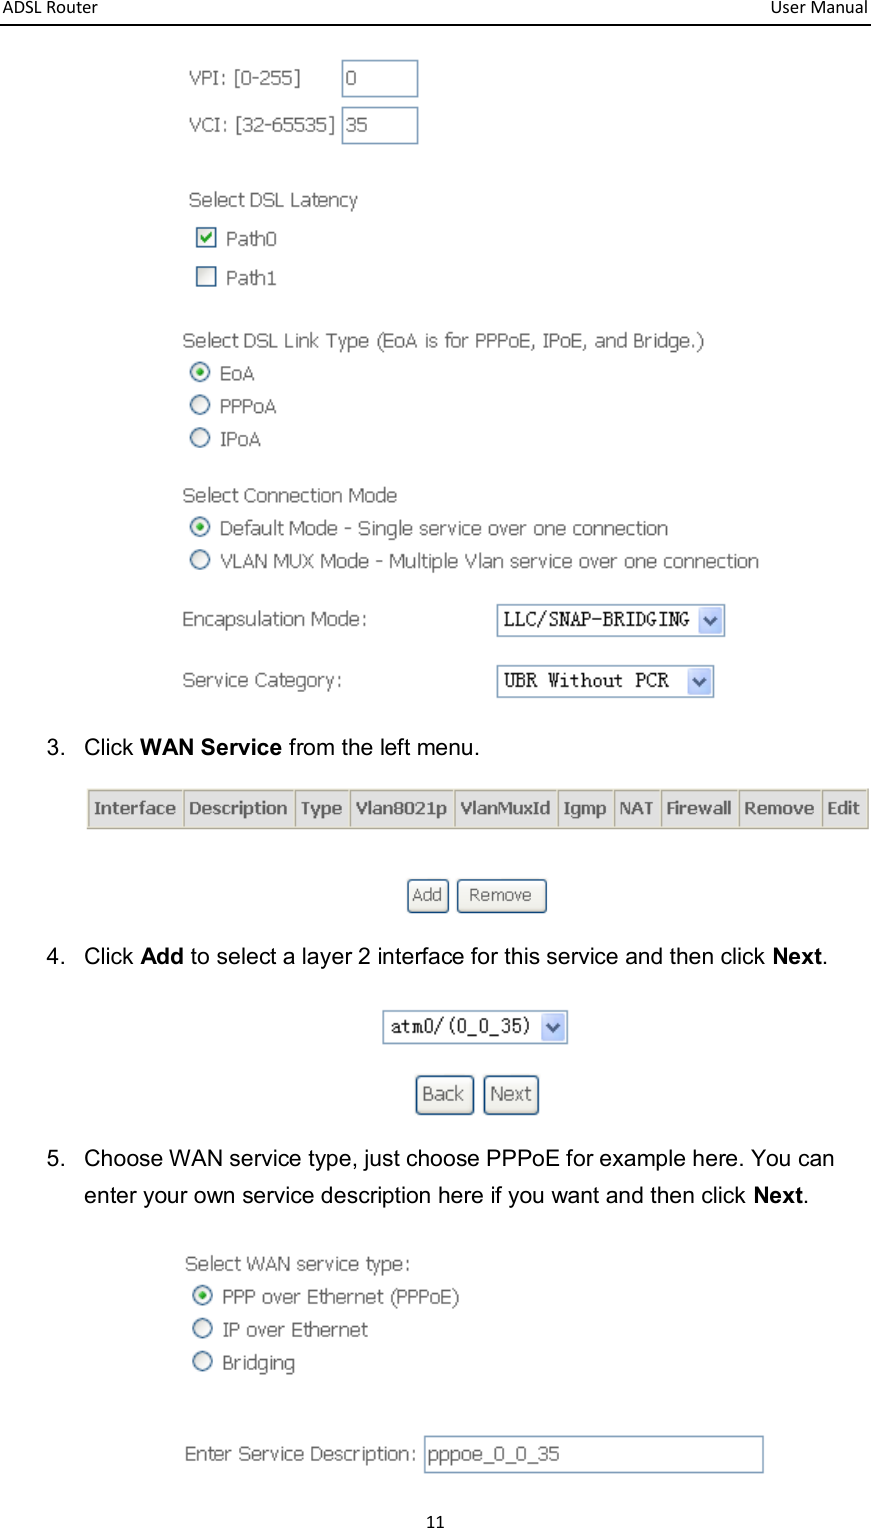 ADSL Router       User Manual 11  3.  Click WAN Service from the left menu.    4.  Click Add to select a layer 2 interface for this service and then click Next.   5.  Choose WAN service type, just choose PPPoE for example here. You can enter your own service description here if you want and then click Next.  